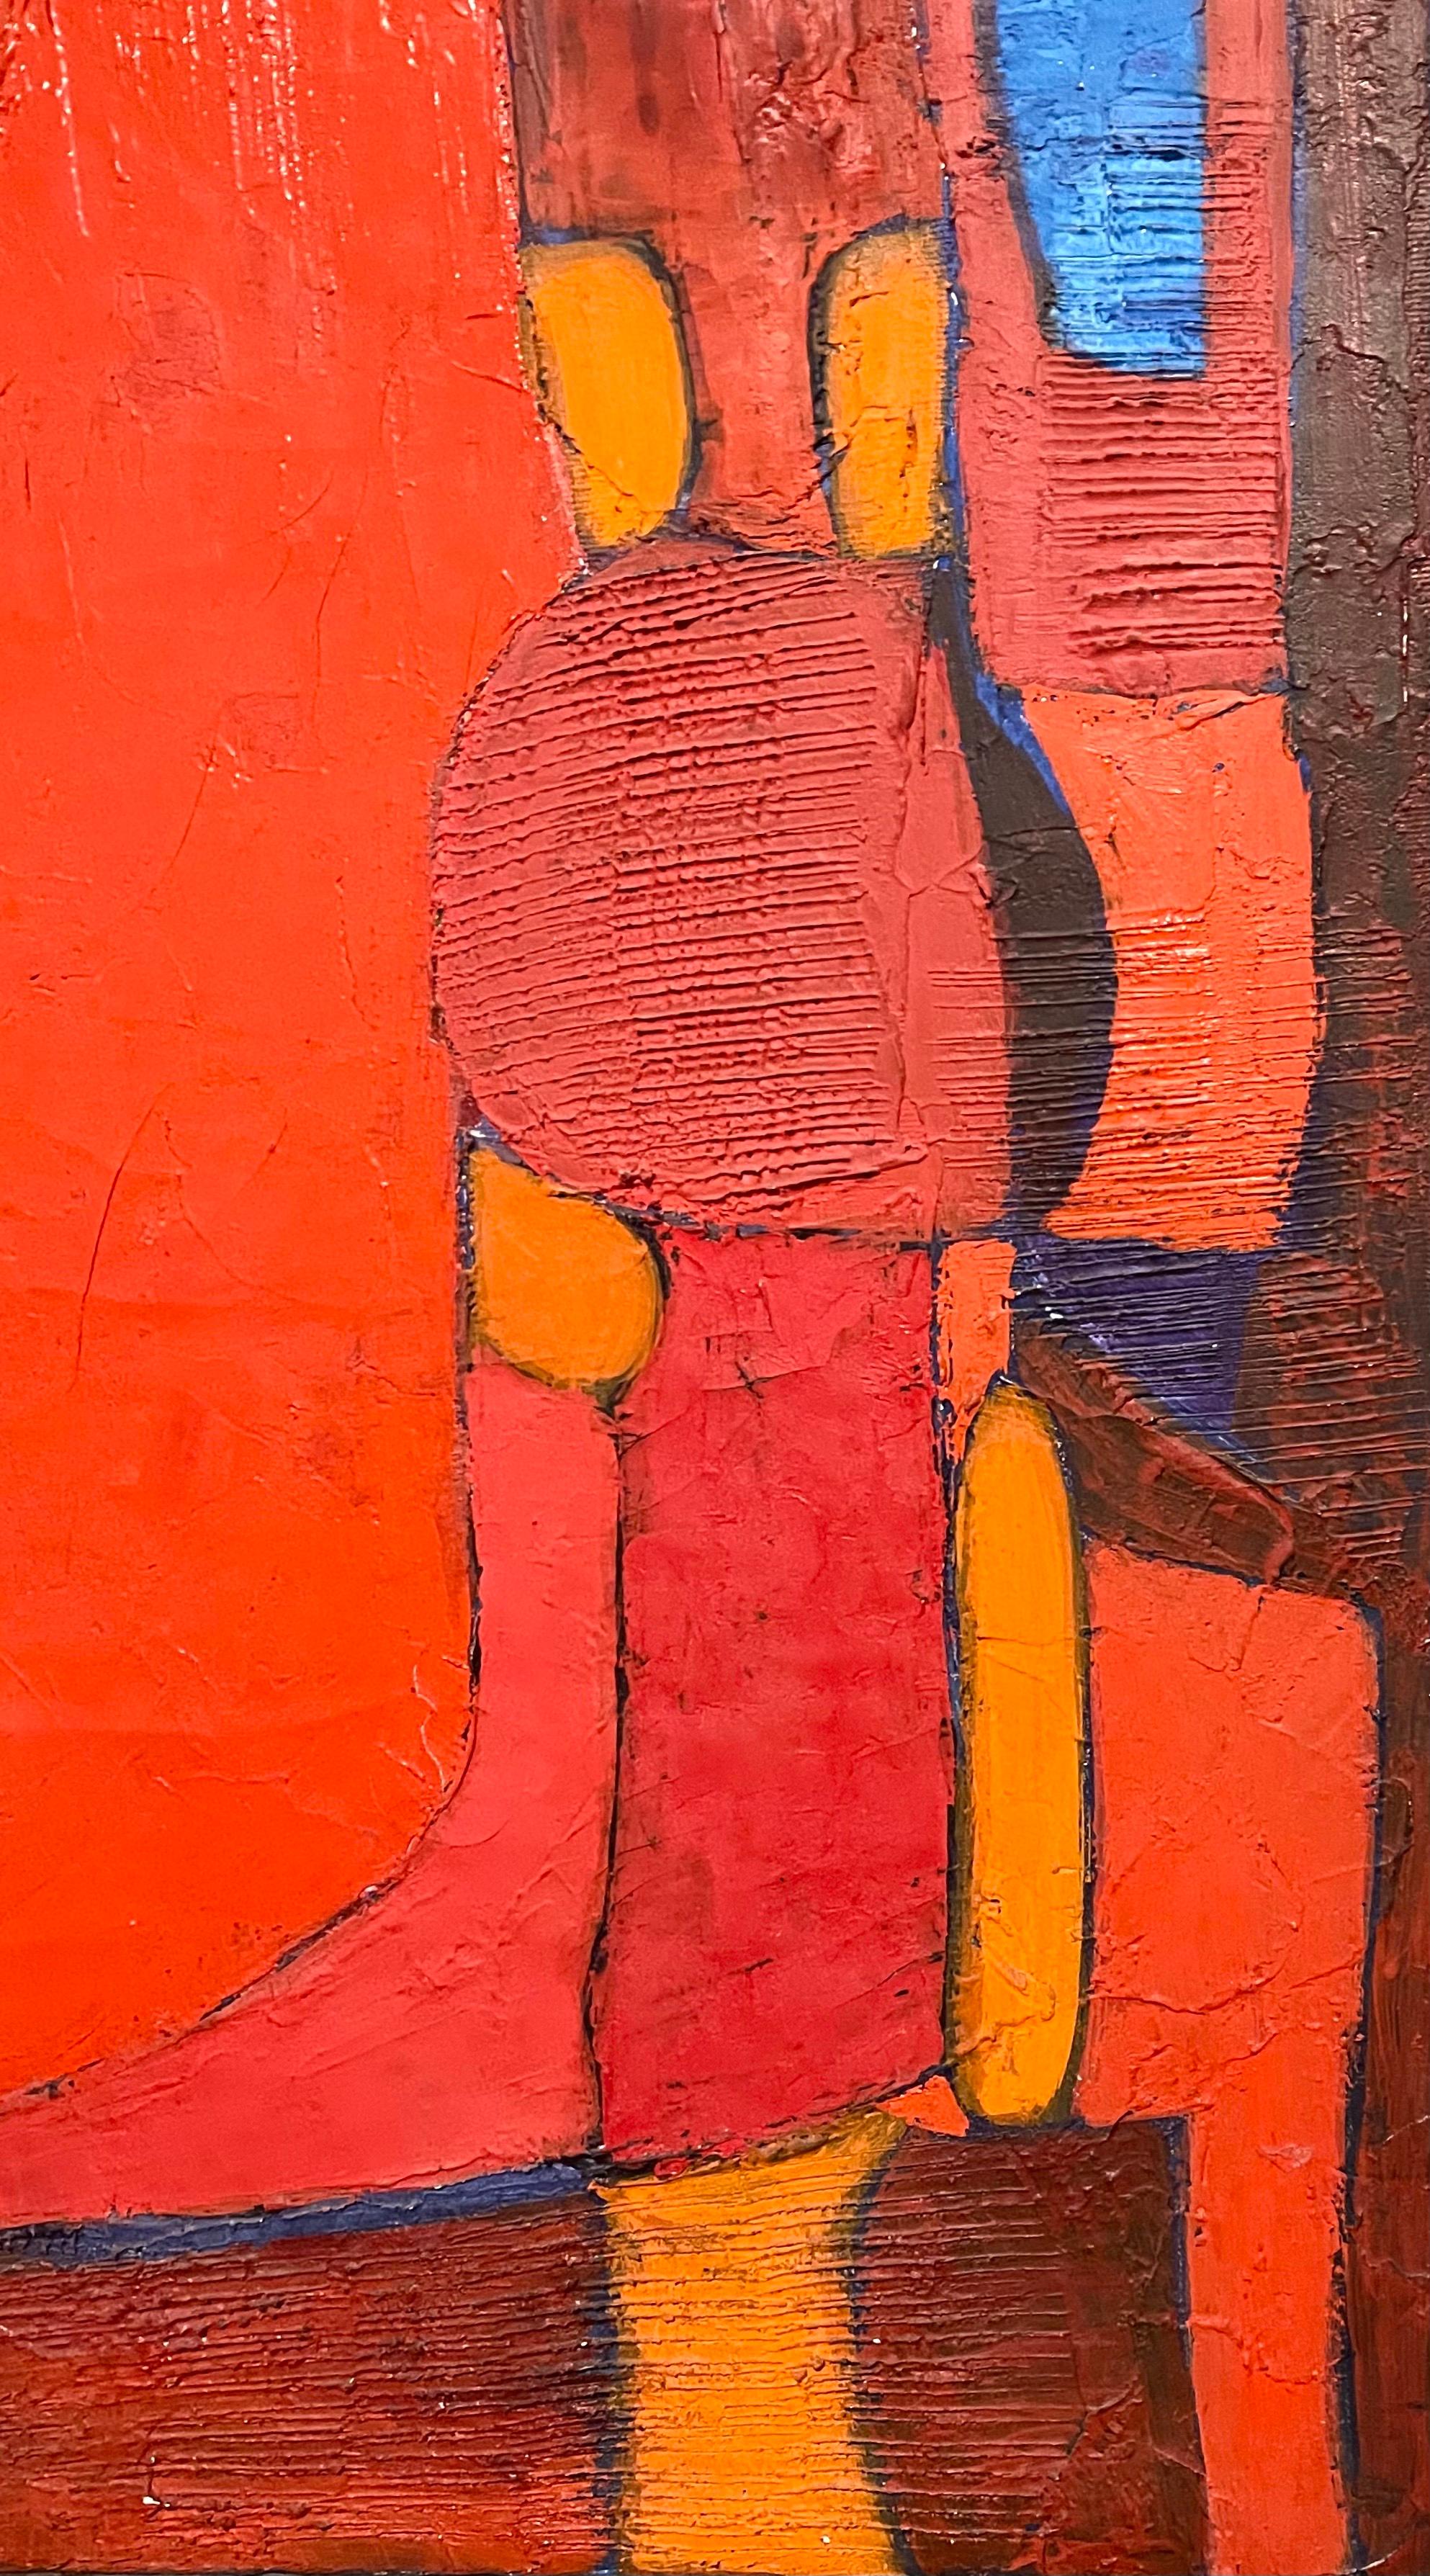 Abstracto Rojo (Red Abstract)
Hand signed and dated 1966


Angel Ponce de León (Spanish-French, 1925-) 
The artist, apparently still living in his late 80's, lived in Spain until 1948. He studied in Madrid and Paris at the Ecole des Beaux Arts.